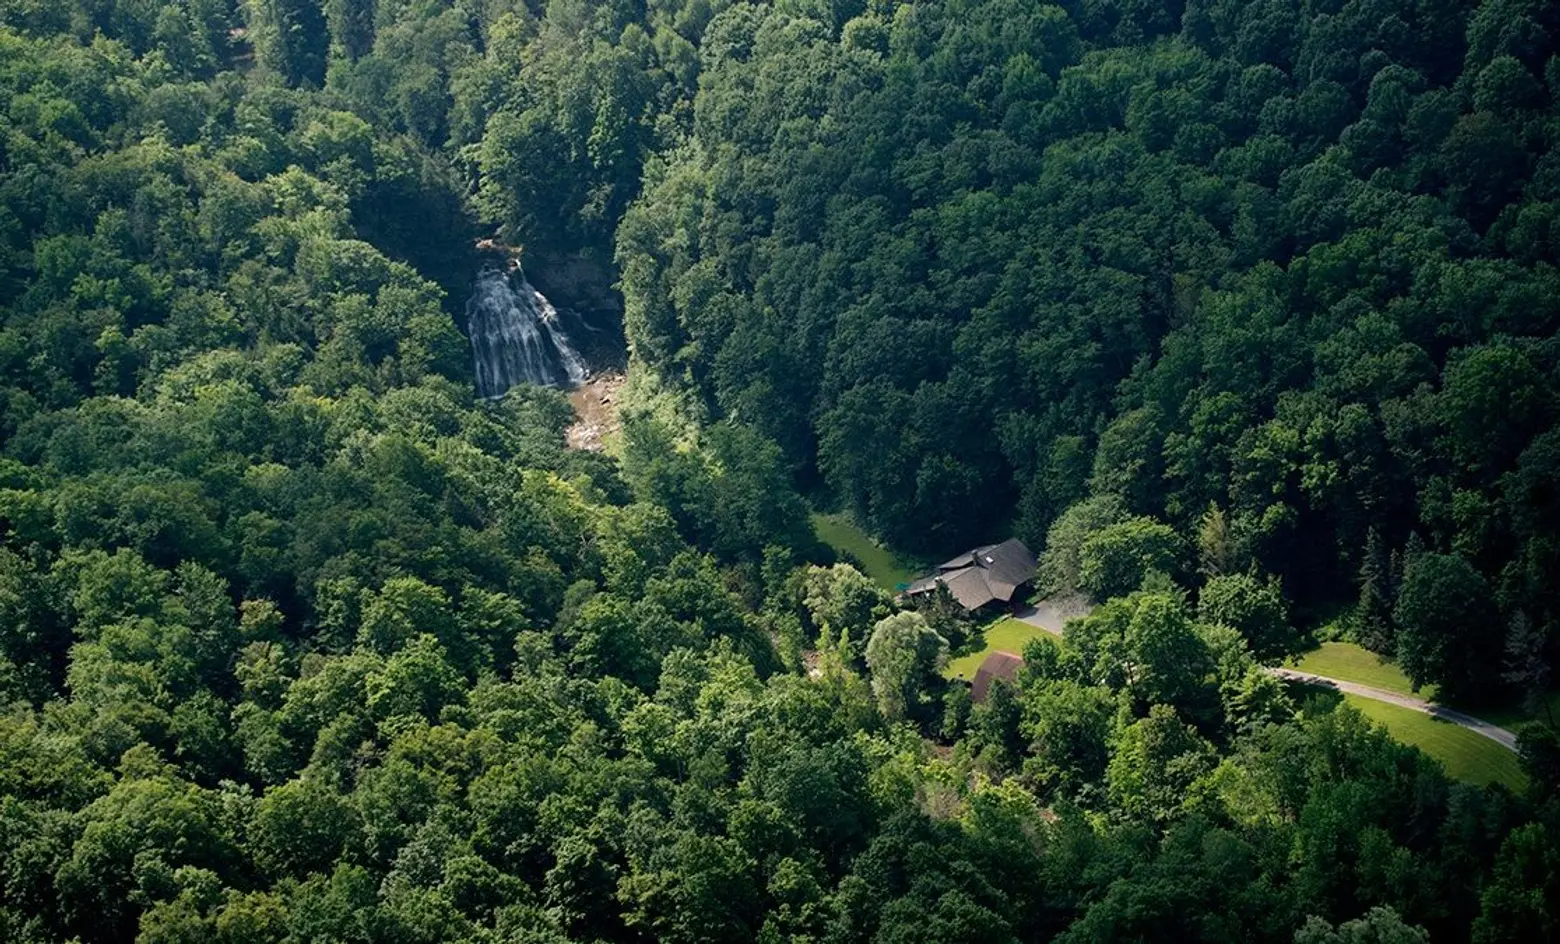 Own two waterfalls, 60 acres of land, and a cabin upstate for $925K